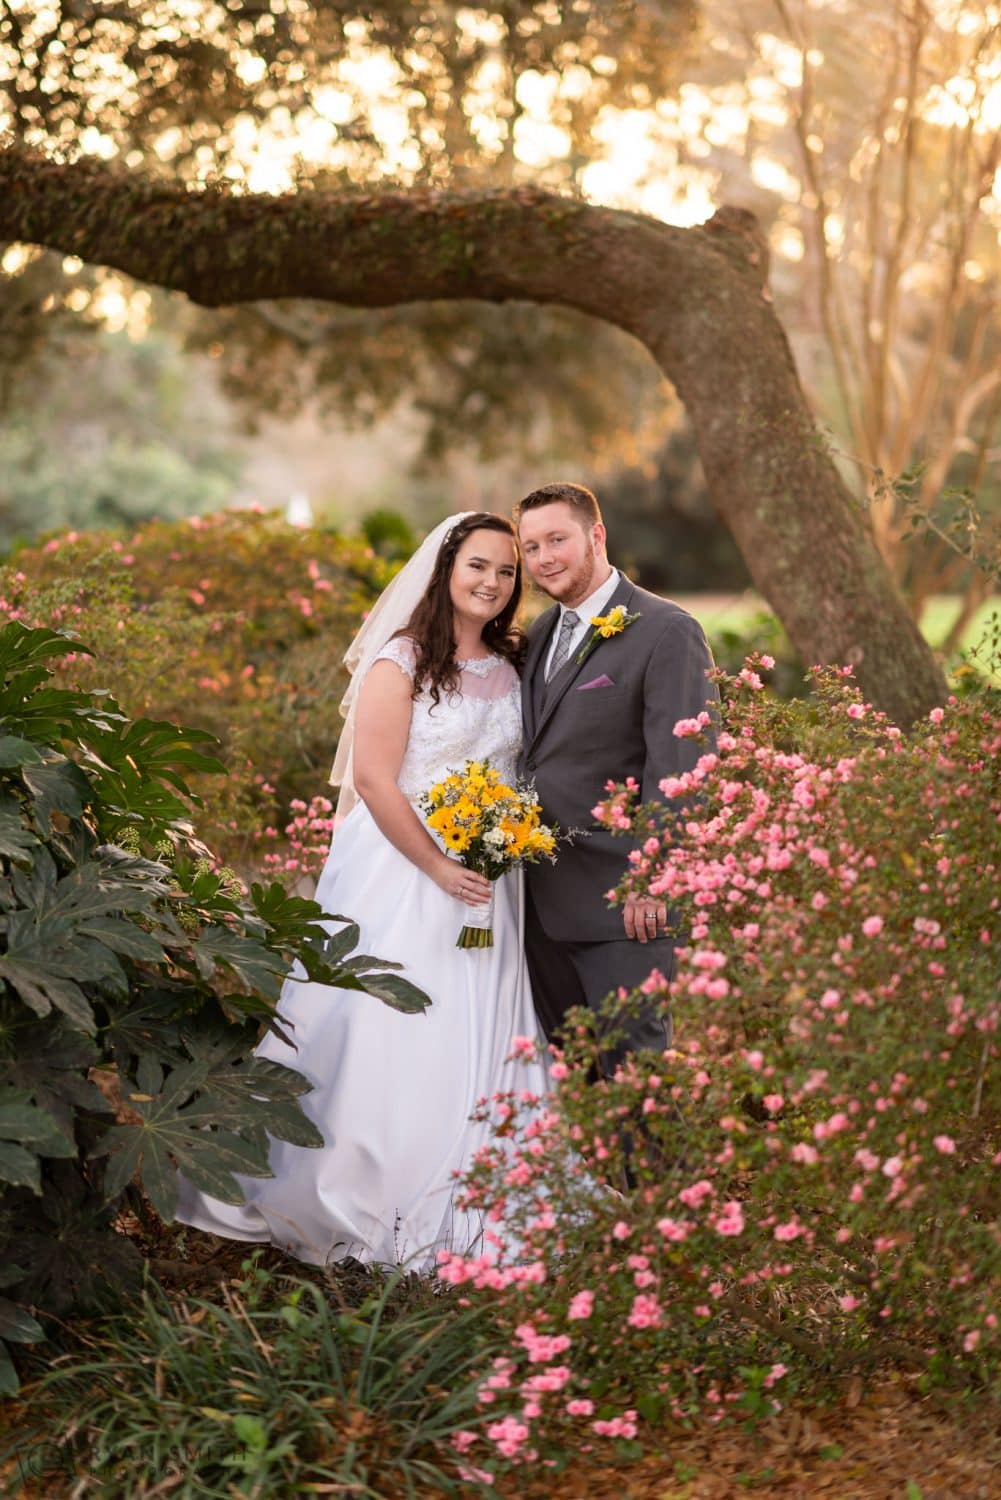 Bride and groom standing in the flowers Litchfield Country Club